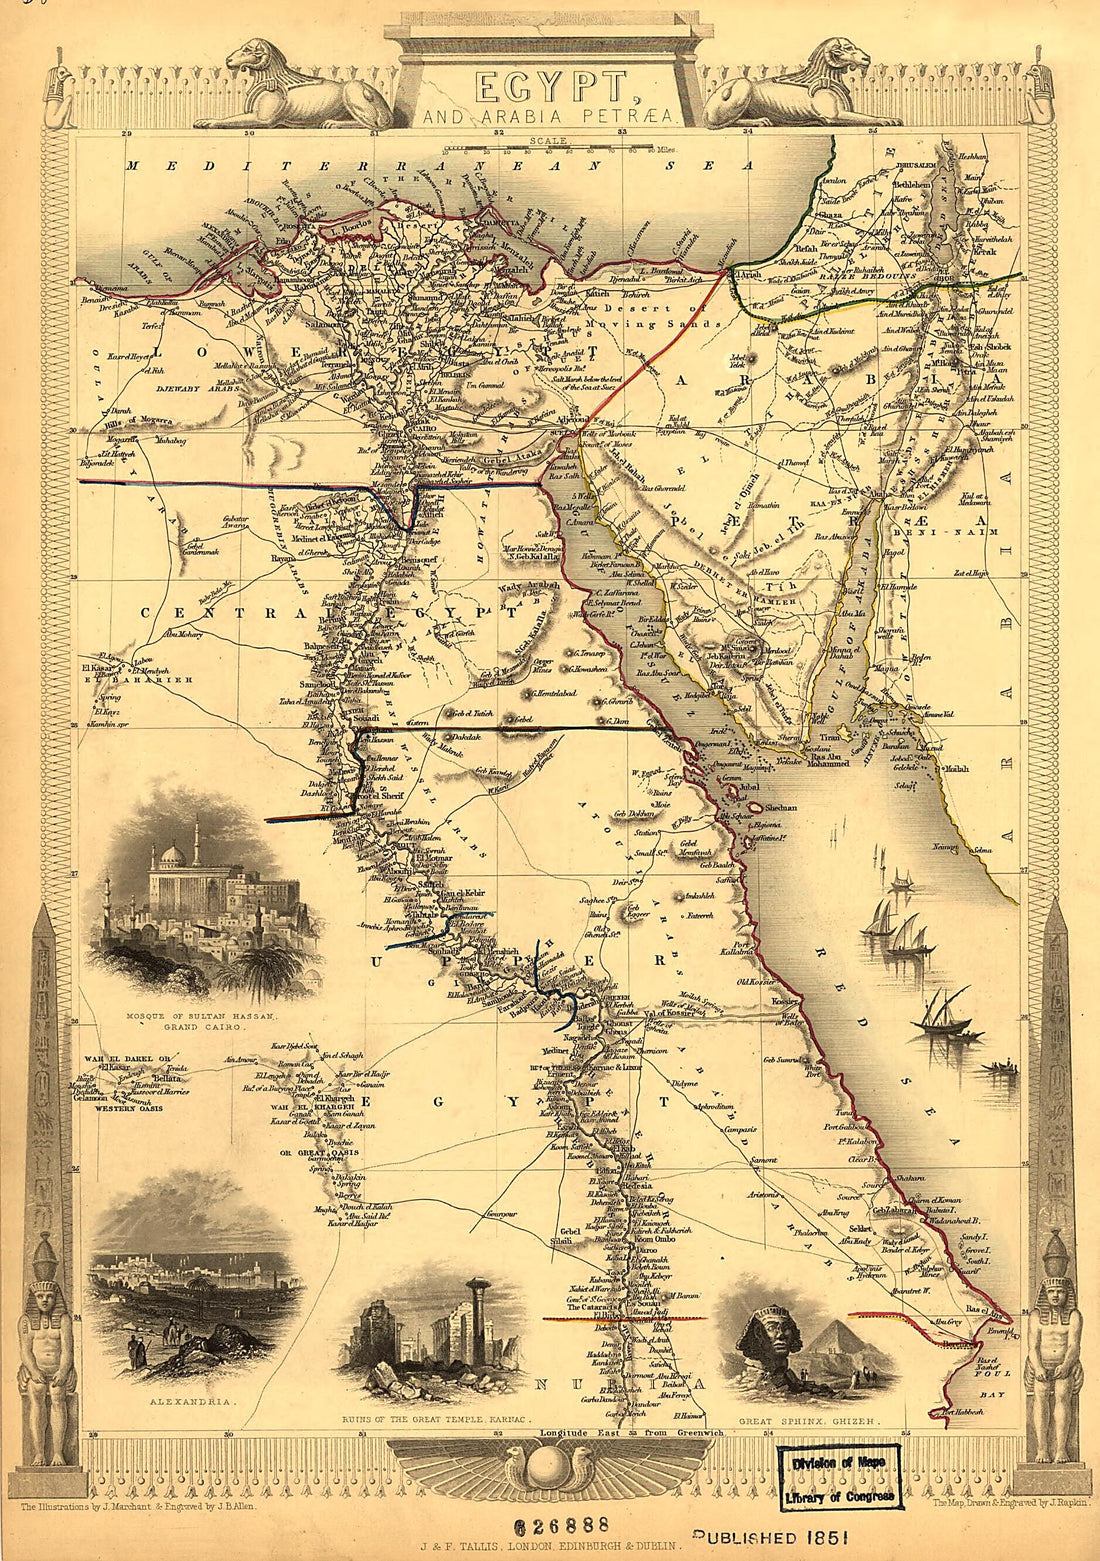 This old map of Egypt and Arabia Petræa from 1800 was created by  John Tallis &amp; Company, J. Rapkin in 1800